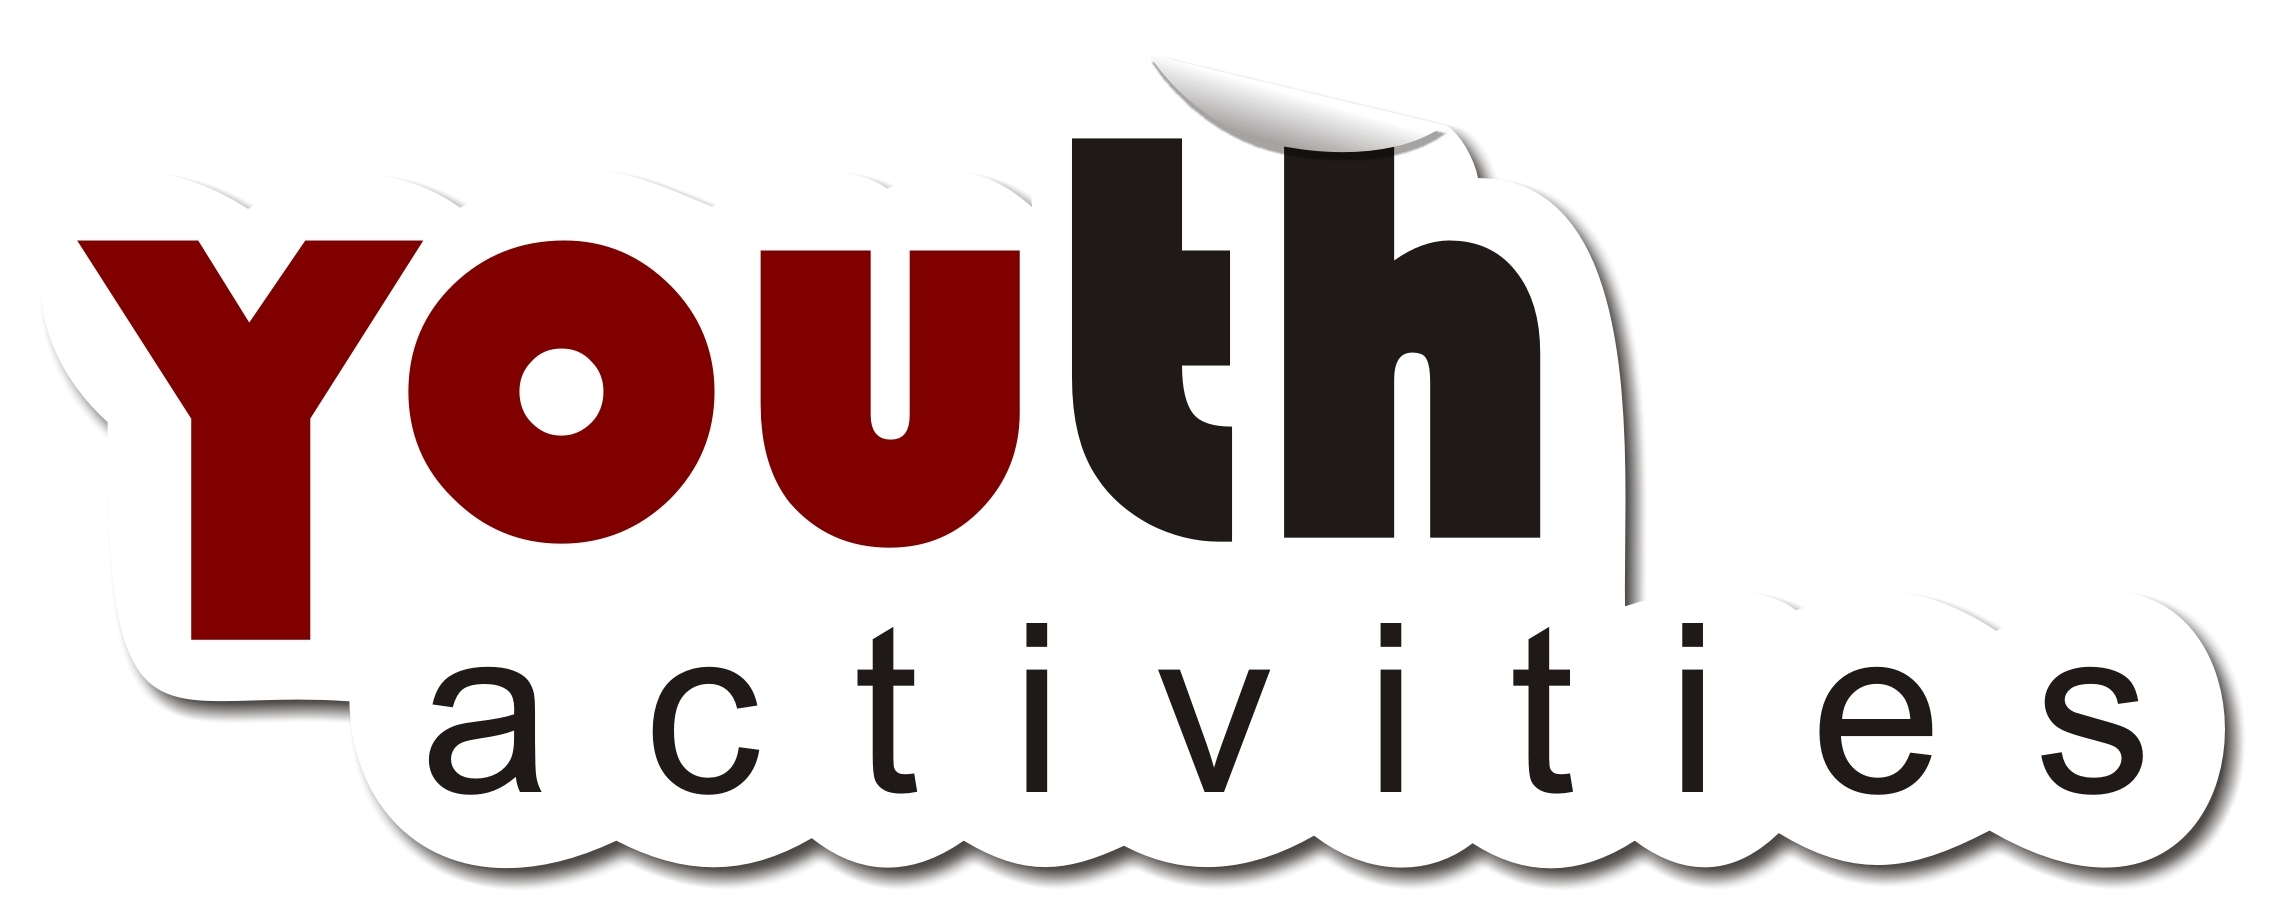 Youth Activities   Free Images At Clker Com   Vector Clip Art Online